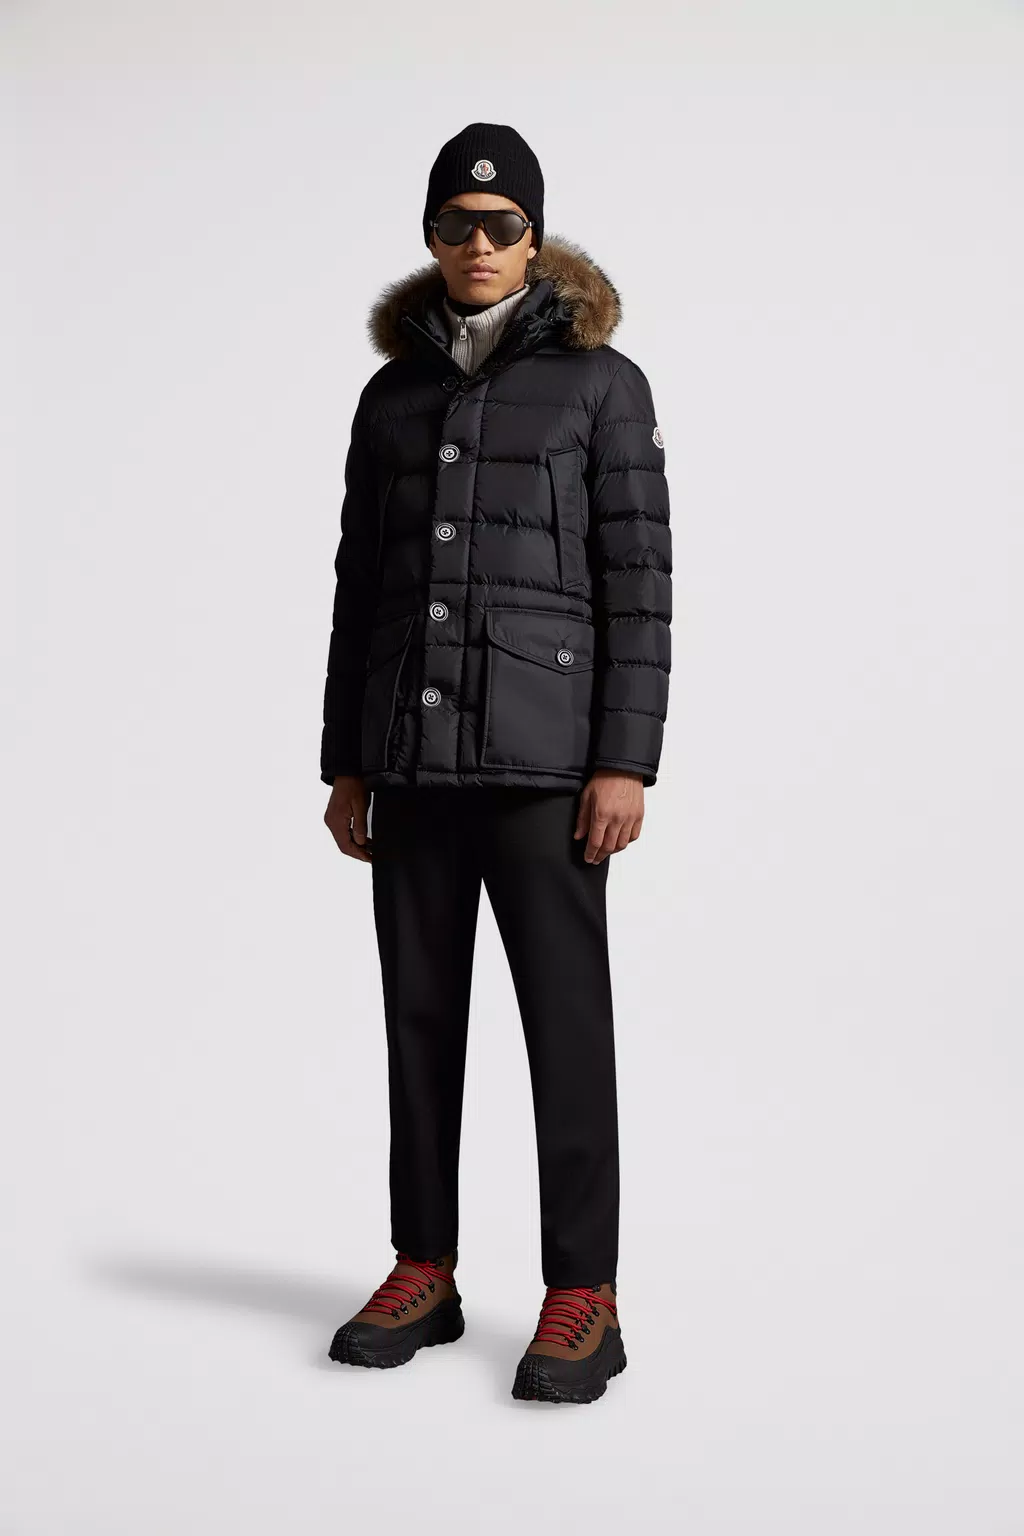 Long Down Jackets for Men - Outerwear